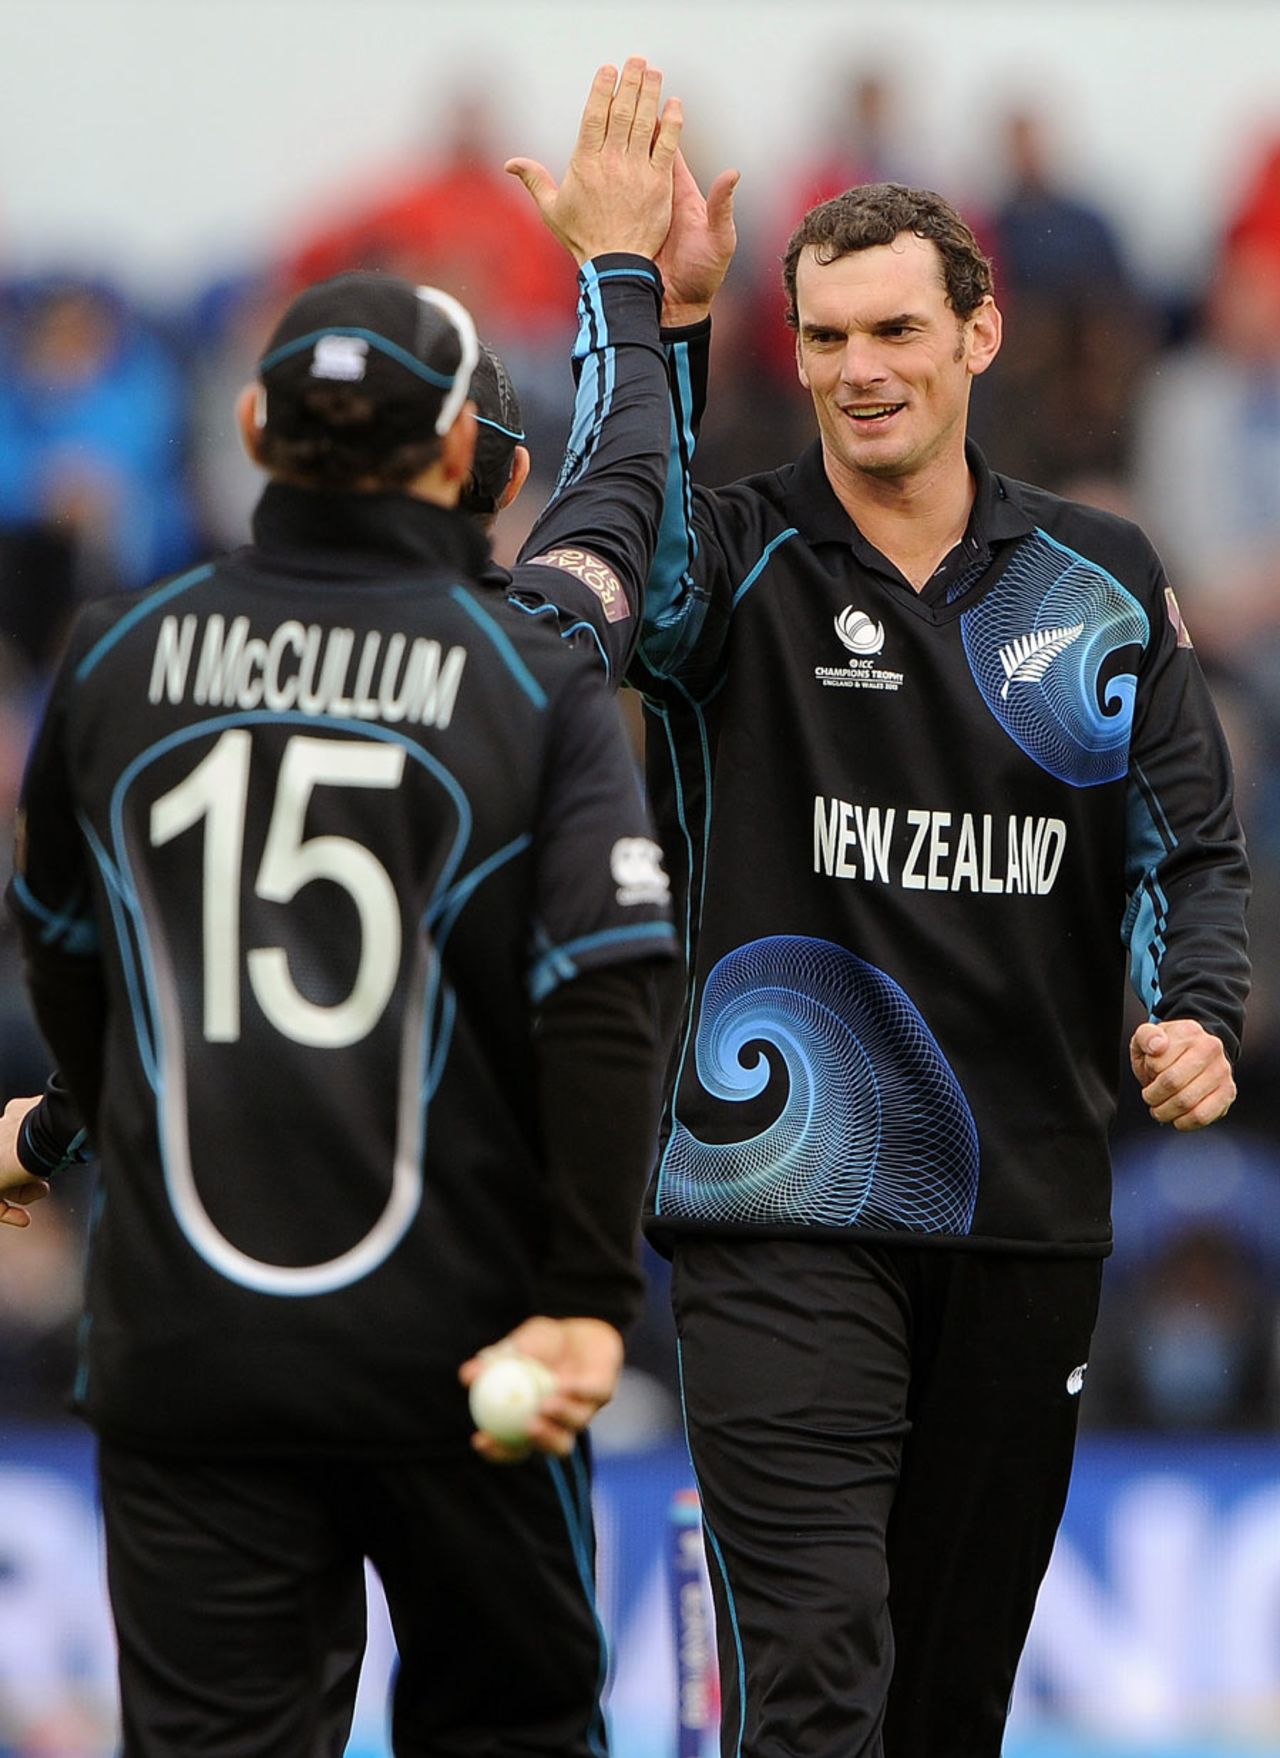 Kyle Mills celebrates a wicket, England v New Zealand, Champions Trophy, Group A, Cardiff, June 16, 2013